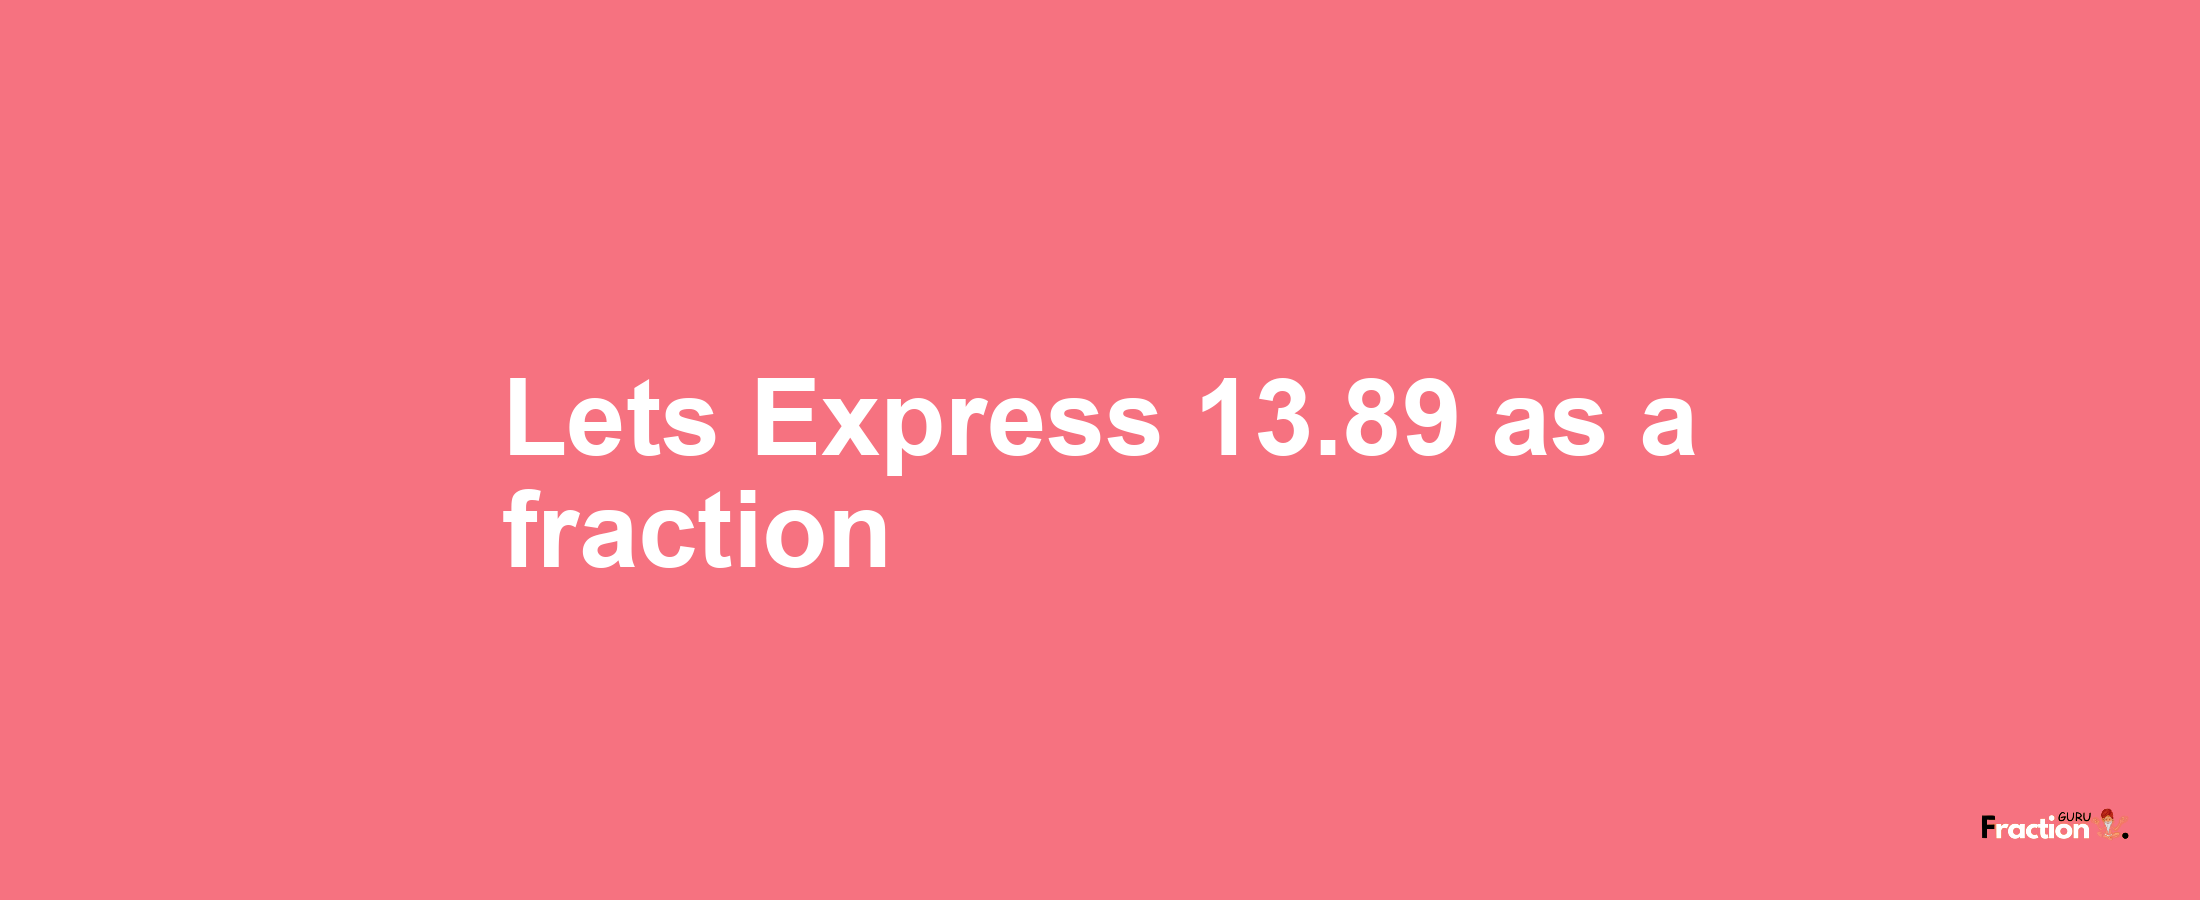 Lets Express 13.89 as afraction